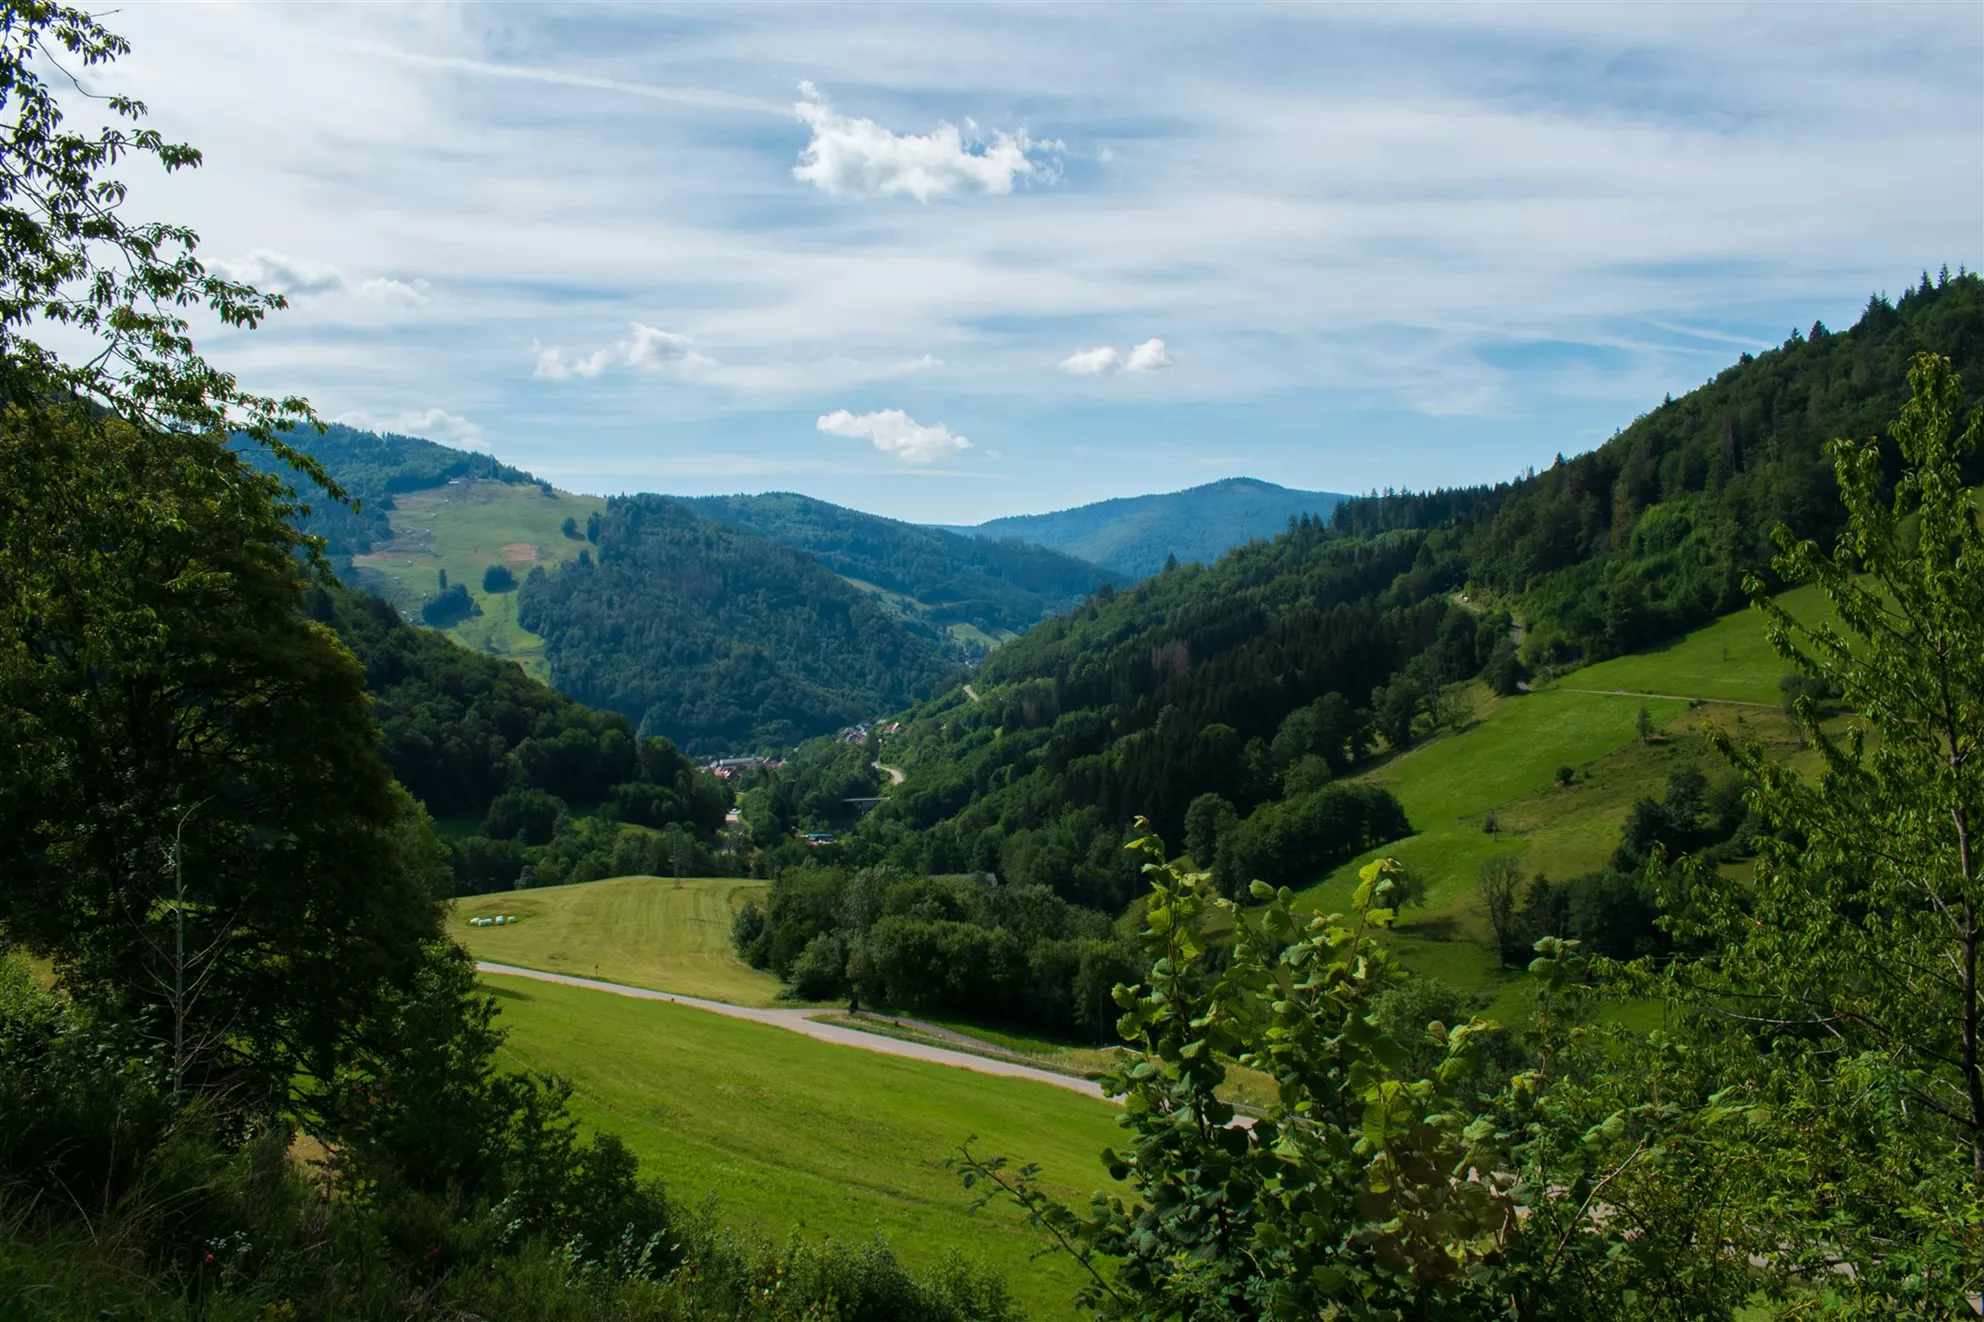 Lush green landscapes - this is how the Black Forest presents itself to its visitors